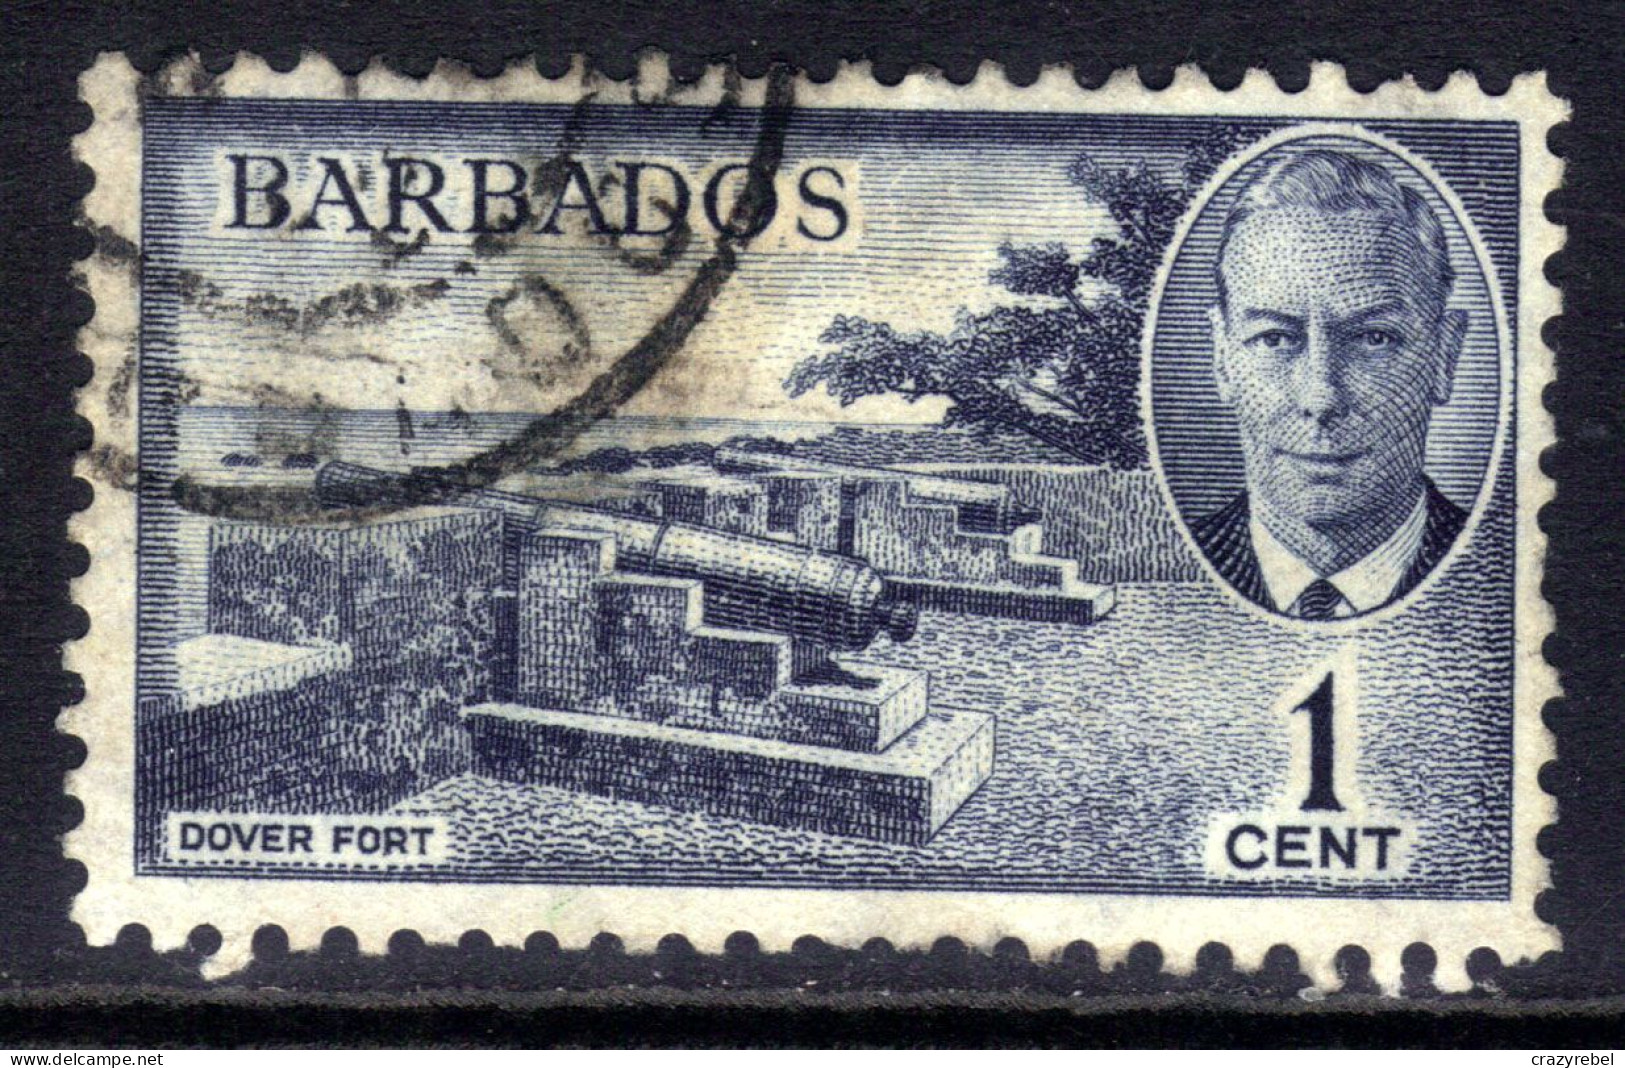 Barbados 1950 KGV1 1ct Dover Fort Used SG 271 ( K801 ) - Barbades (...-1966)